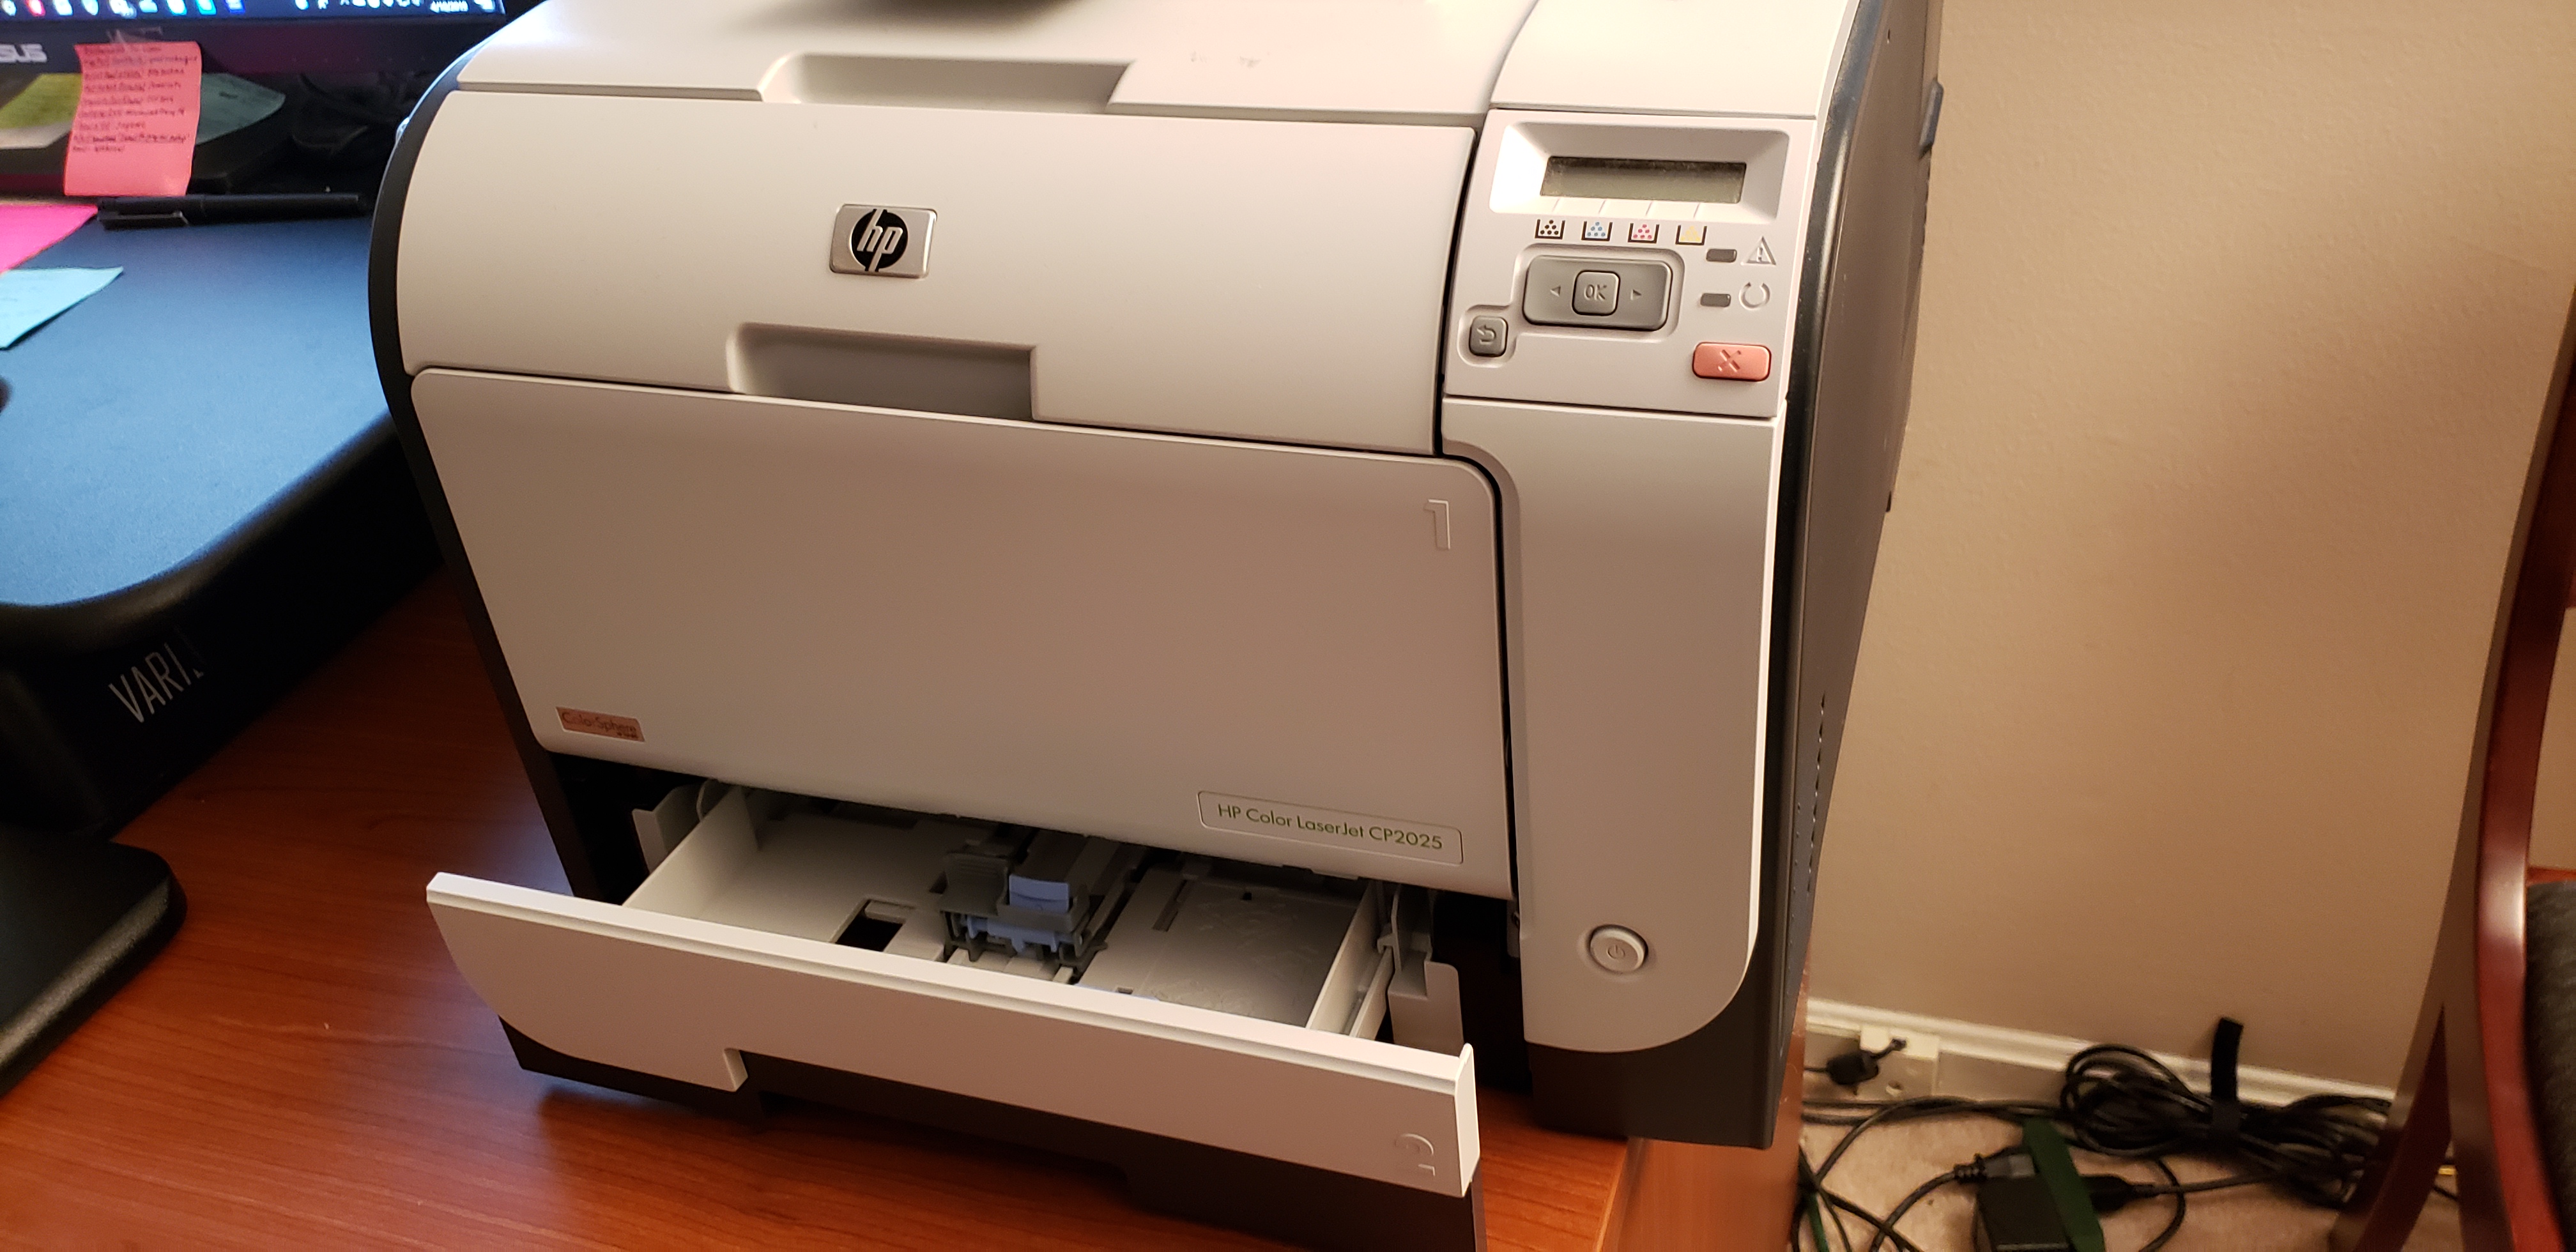 Can't slide tray 2 of printer back into slot - HP Support Community 7058477